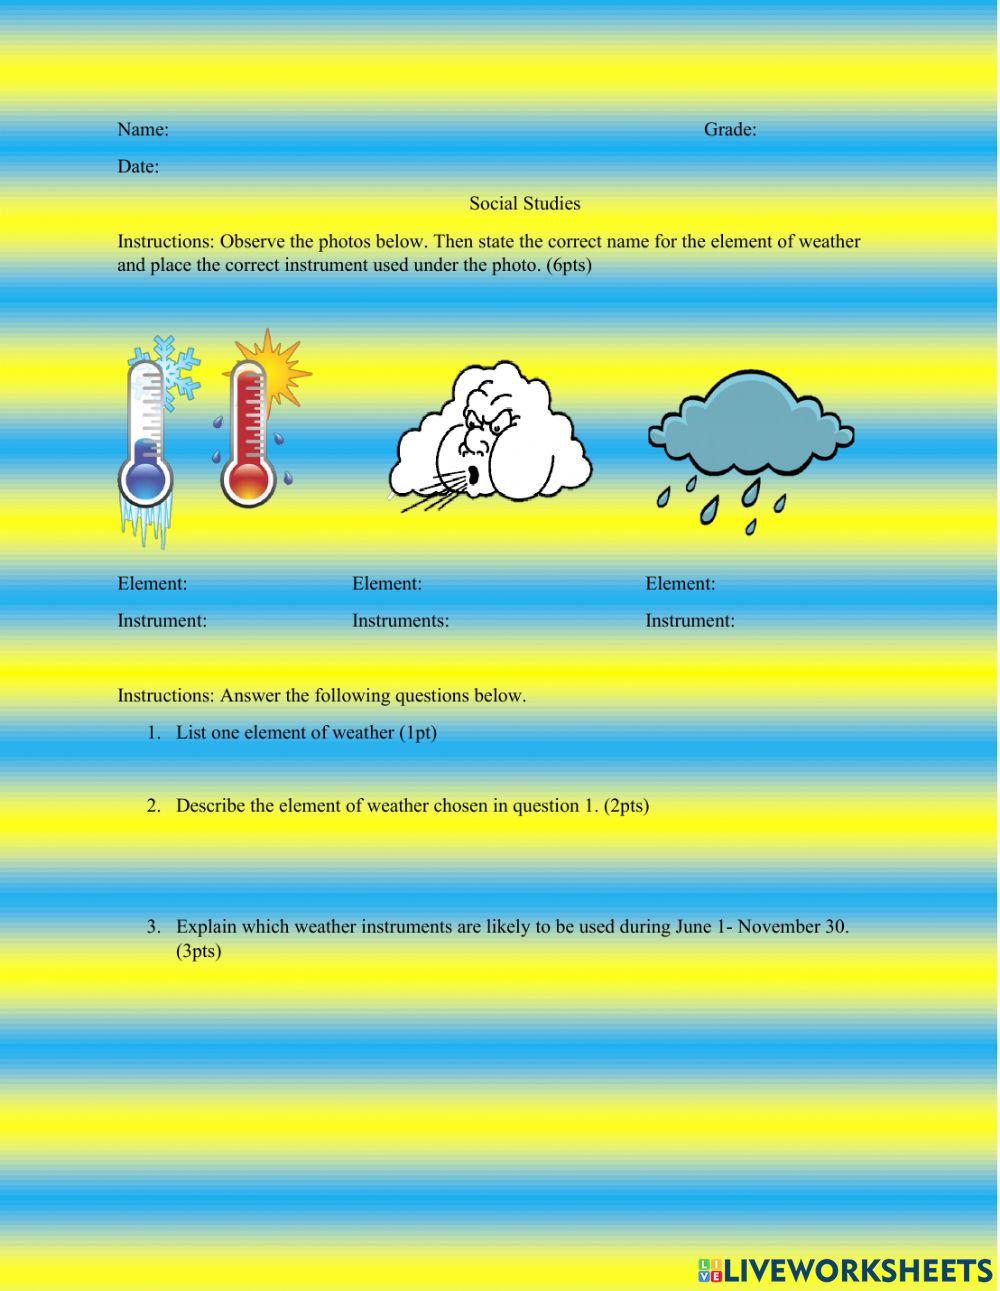 Elements of Weather